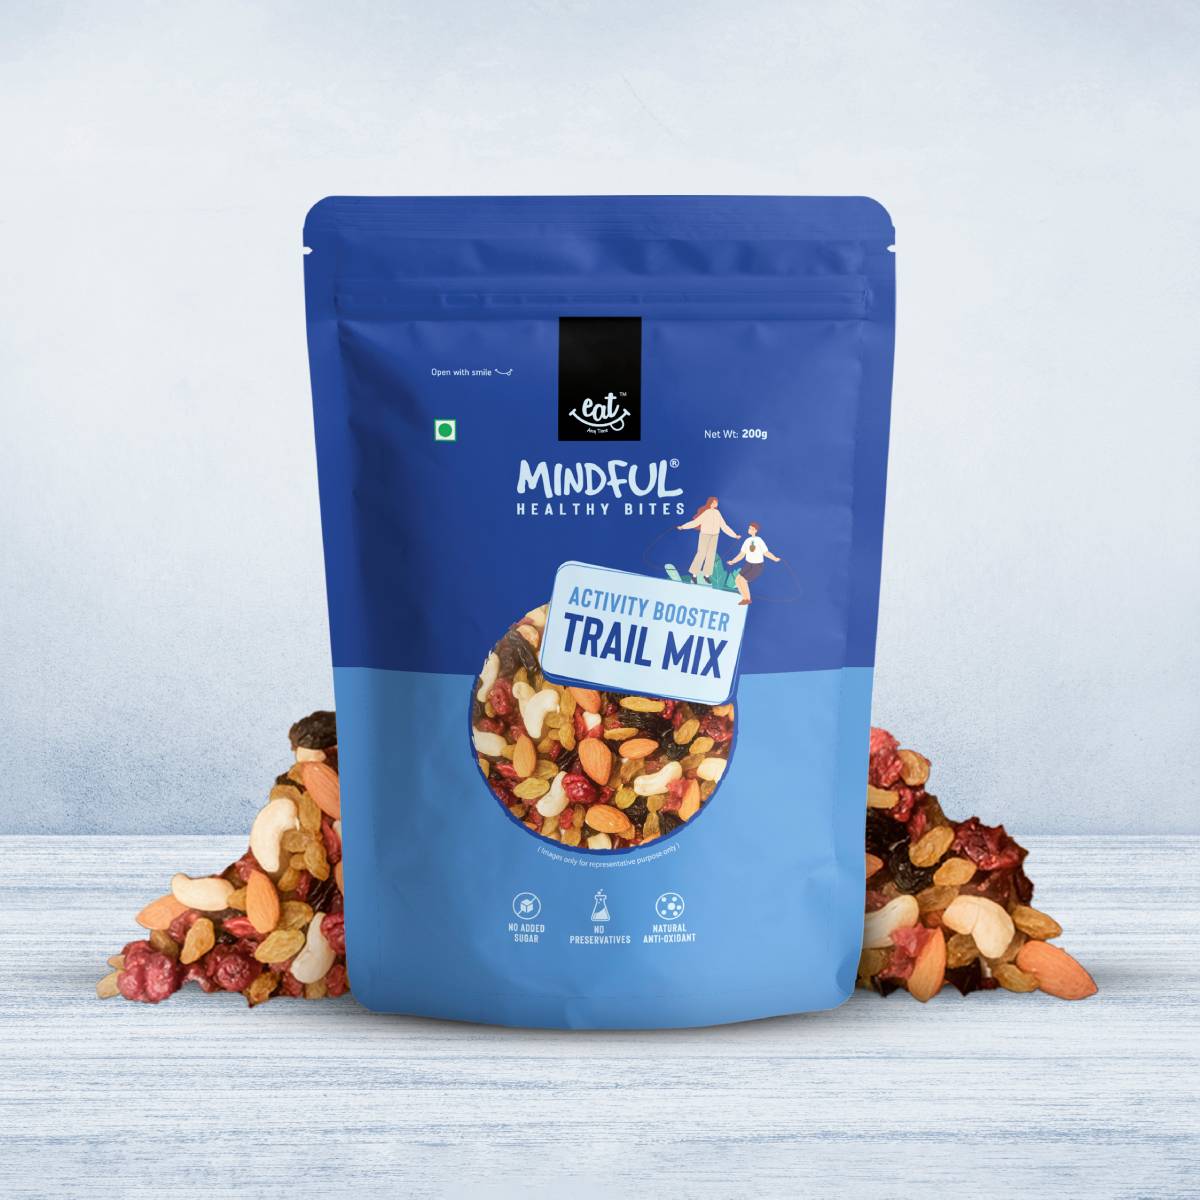 Activity Booster Lifestyle TRAIL MIX - Eatanytime